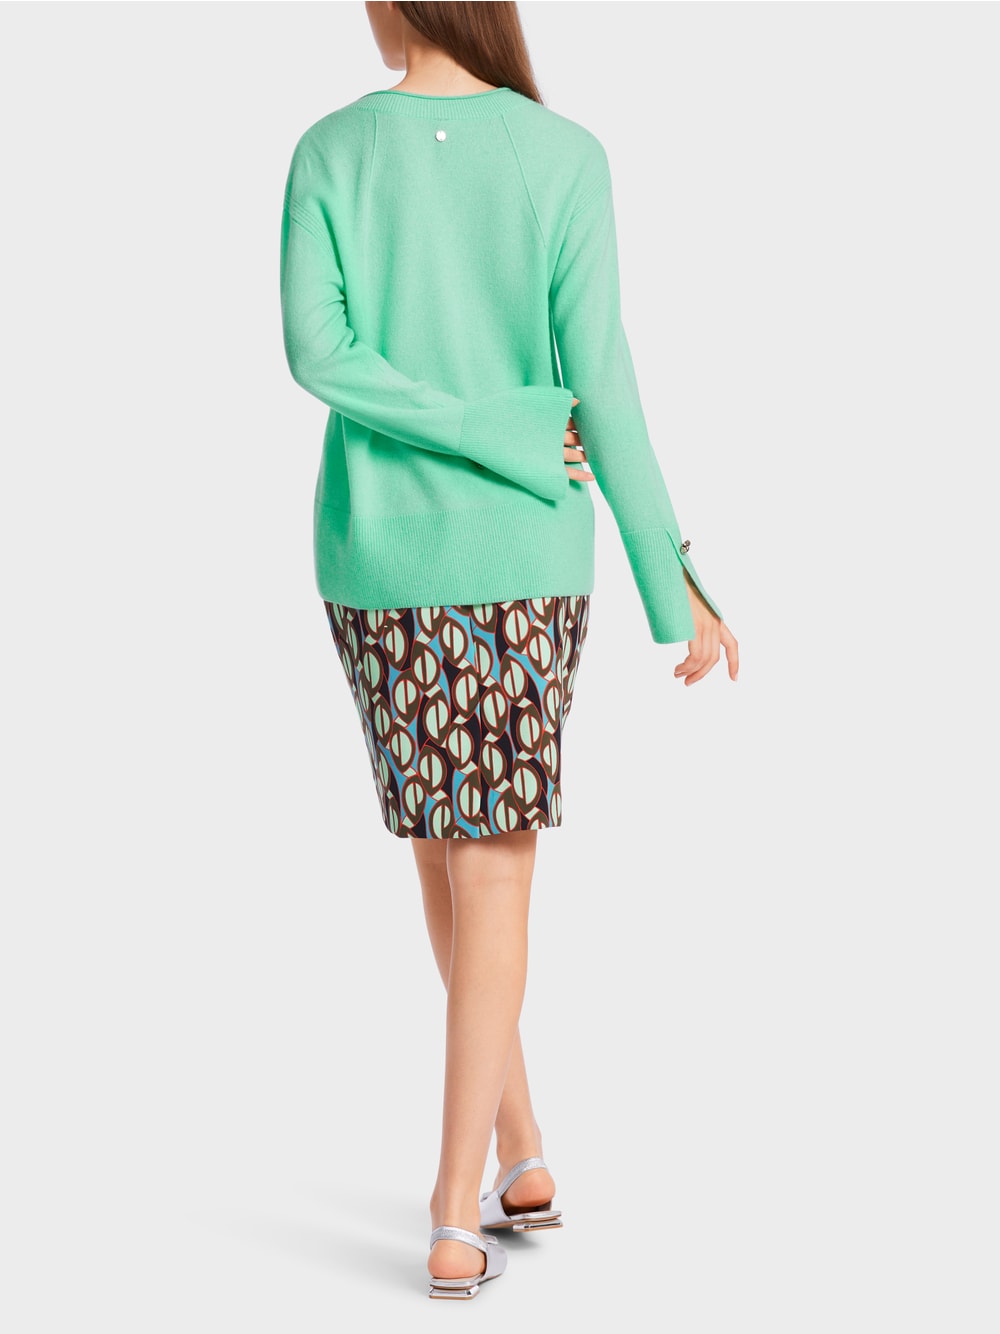 Rethink Together Sweater in Soft Malachite